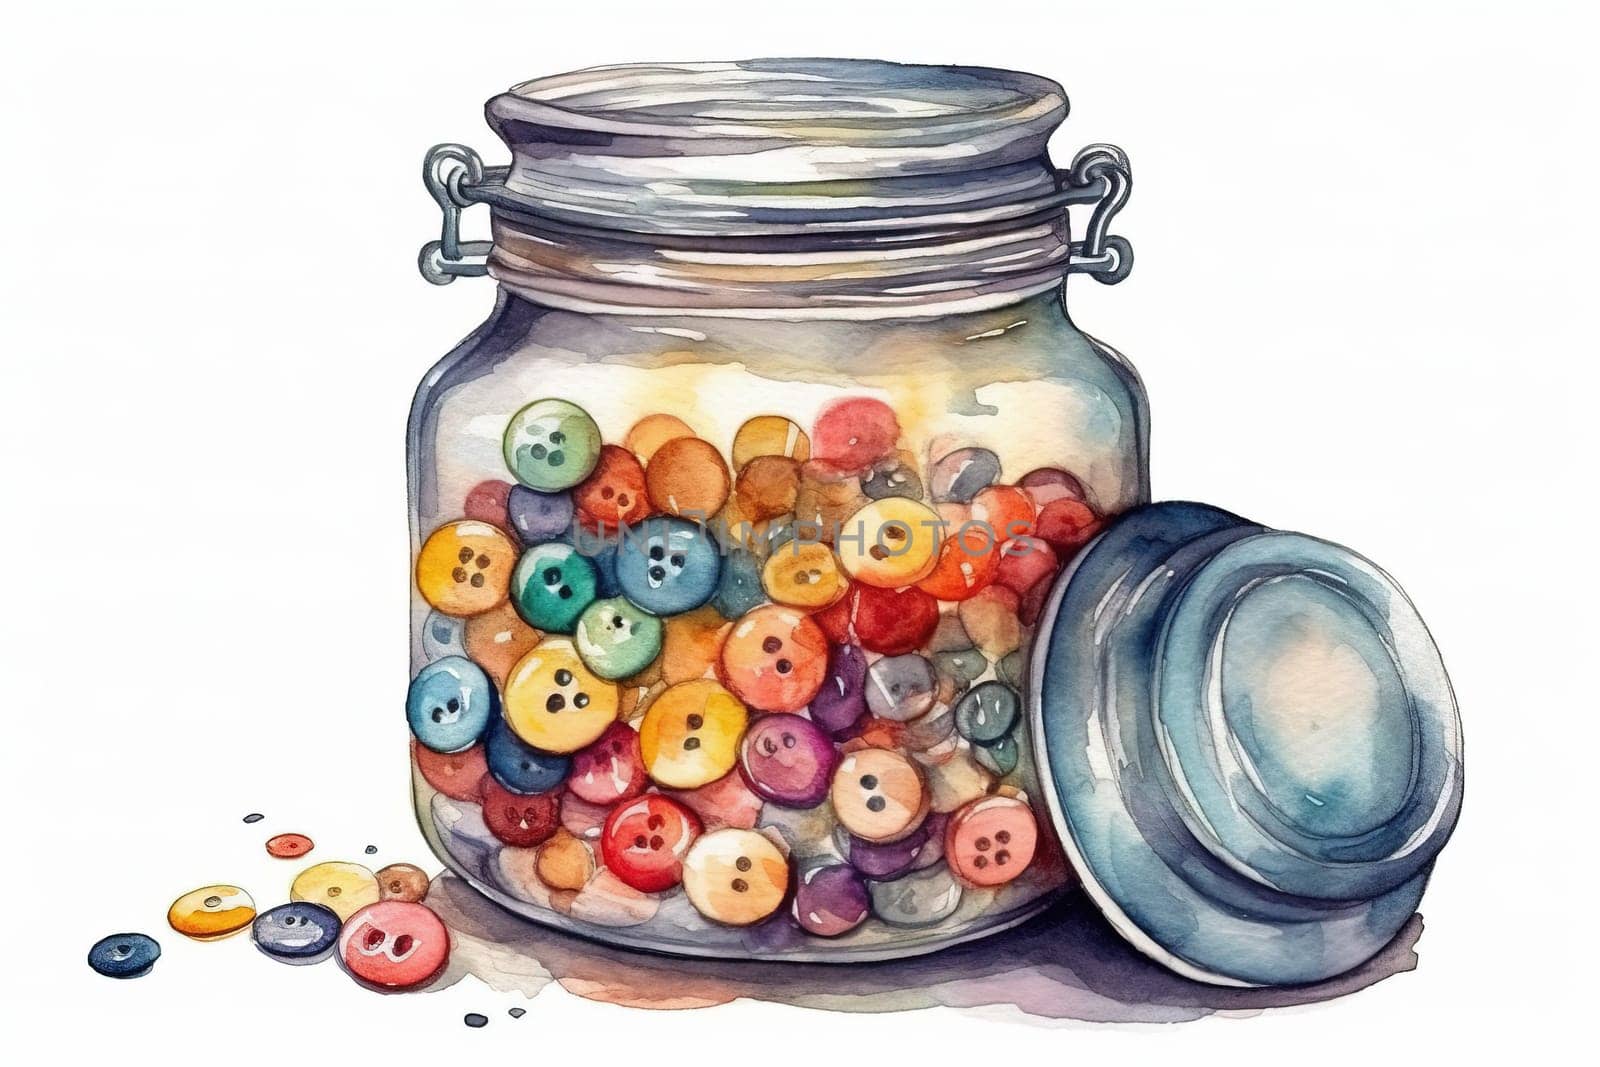 Watercolor Illustration Of Glass Jar With Colorful Sewing Buttons Inside by GekaSkr